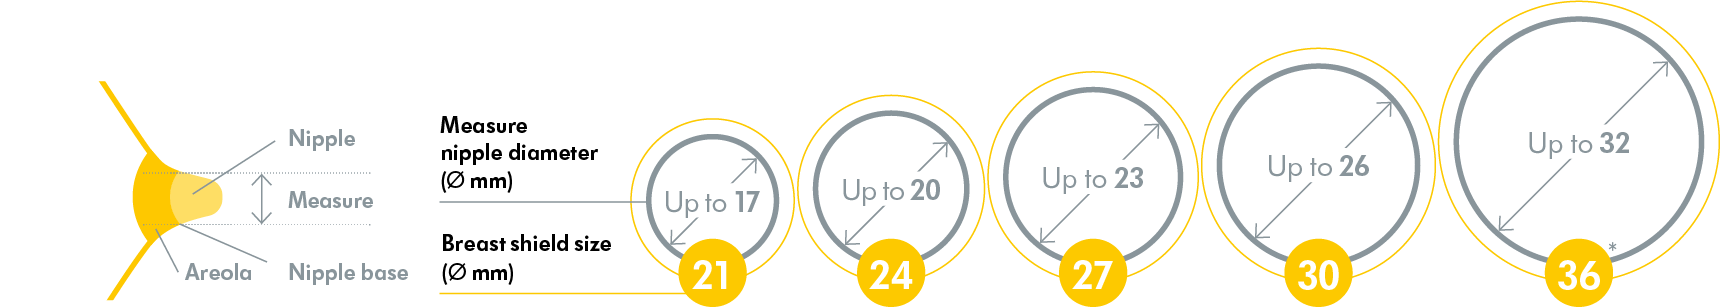 Medela Contact Shield Size Chart